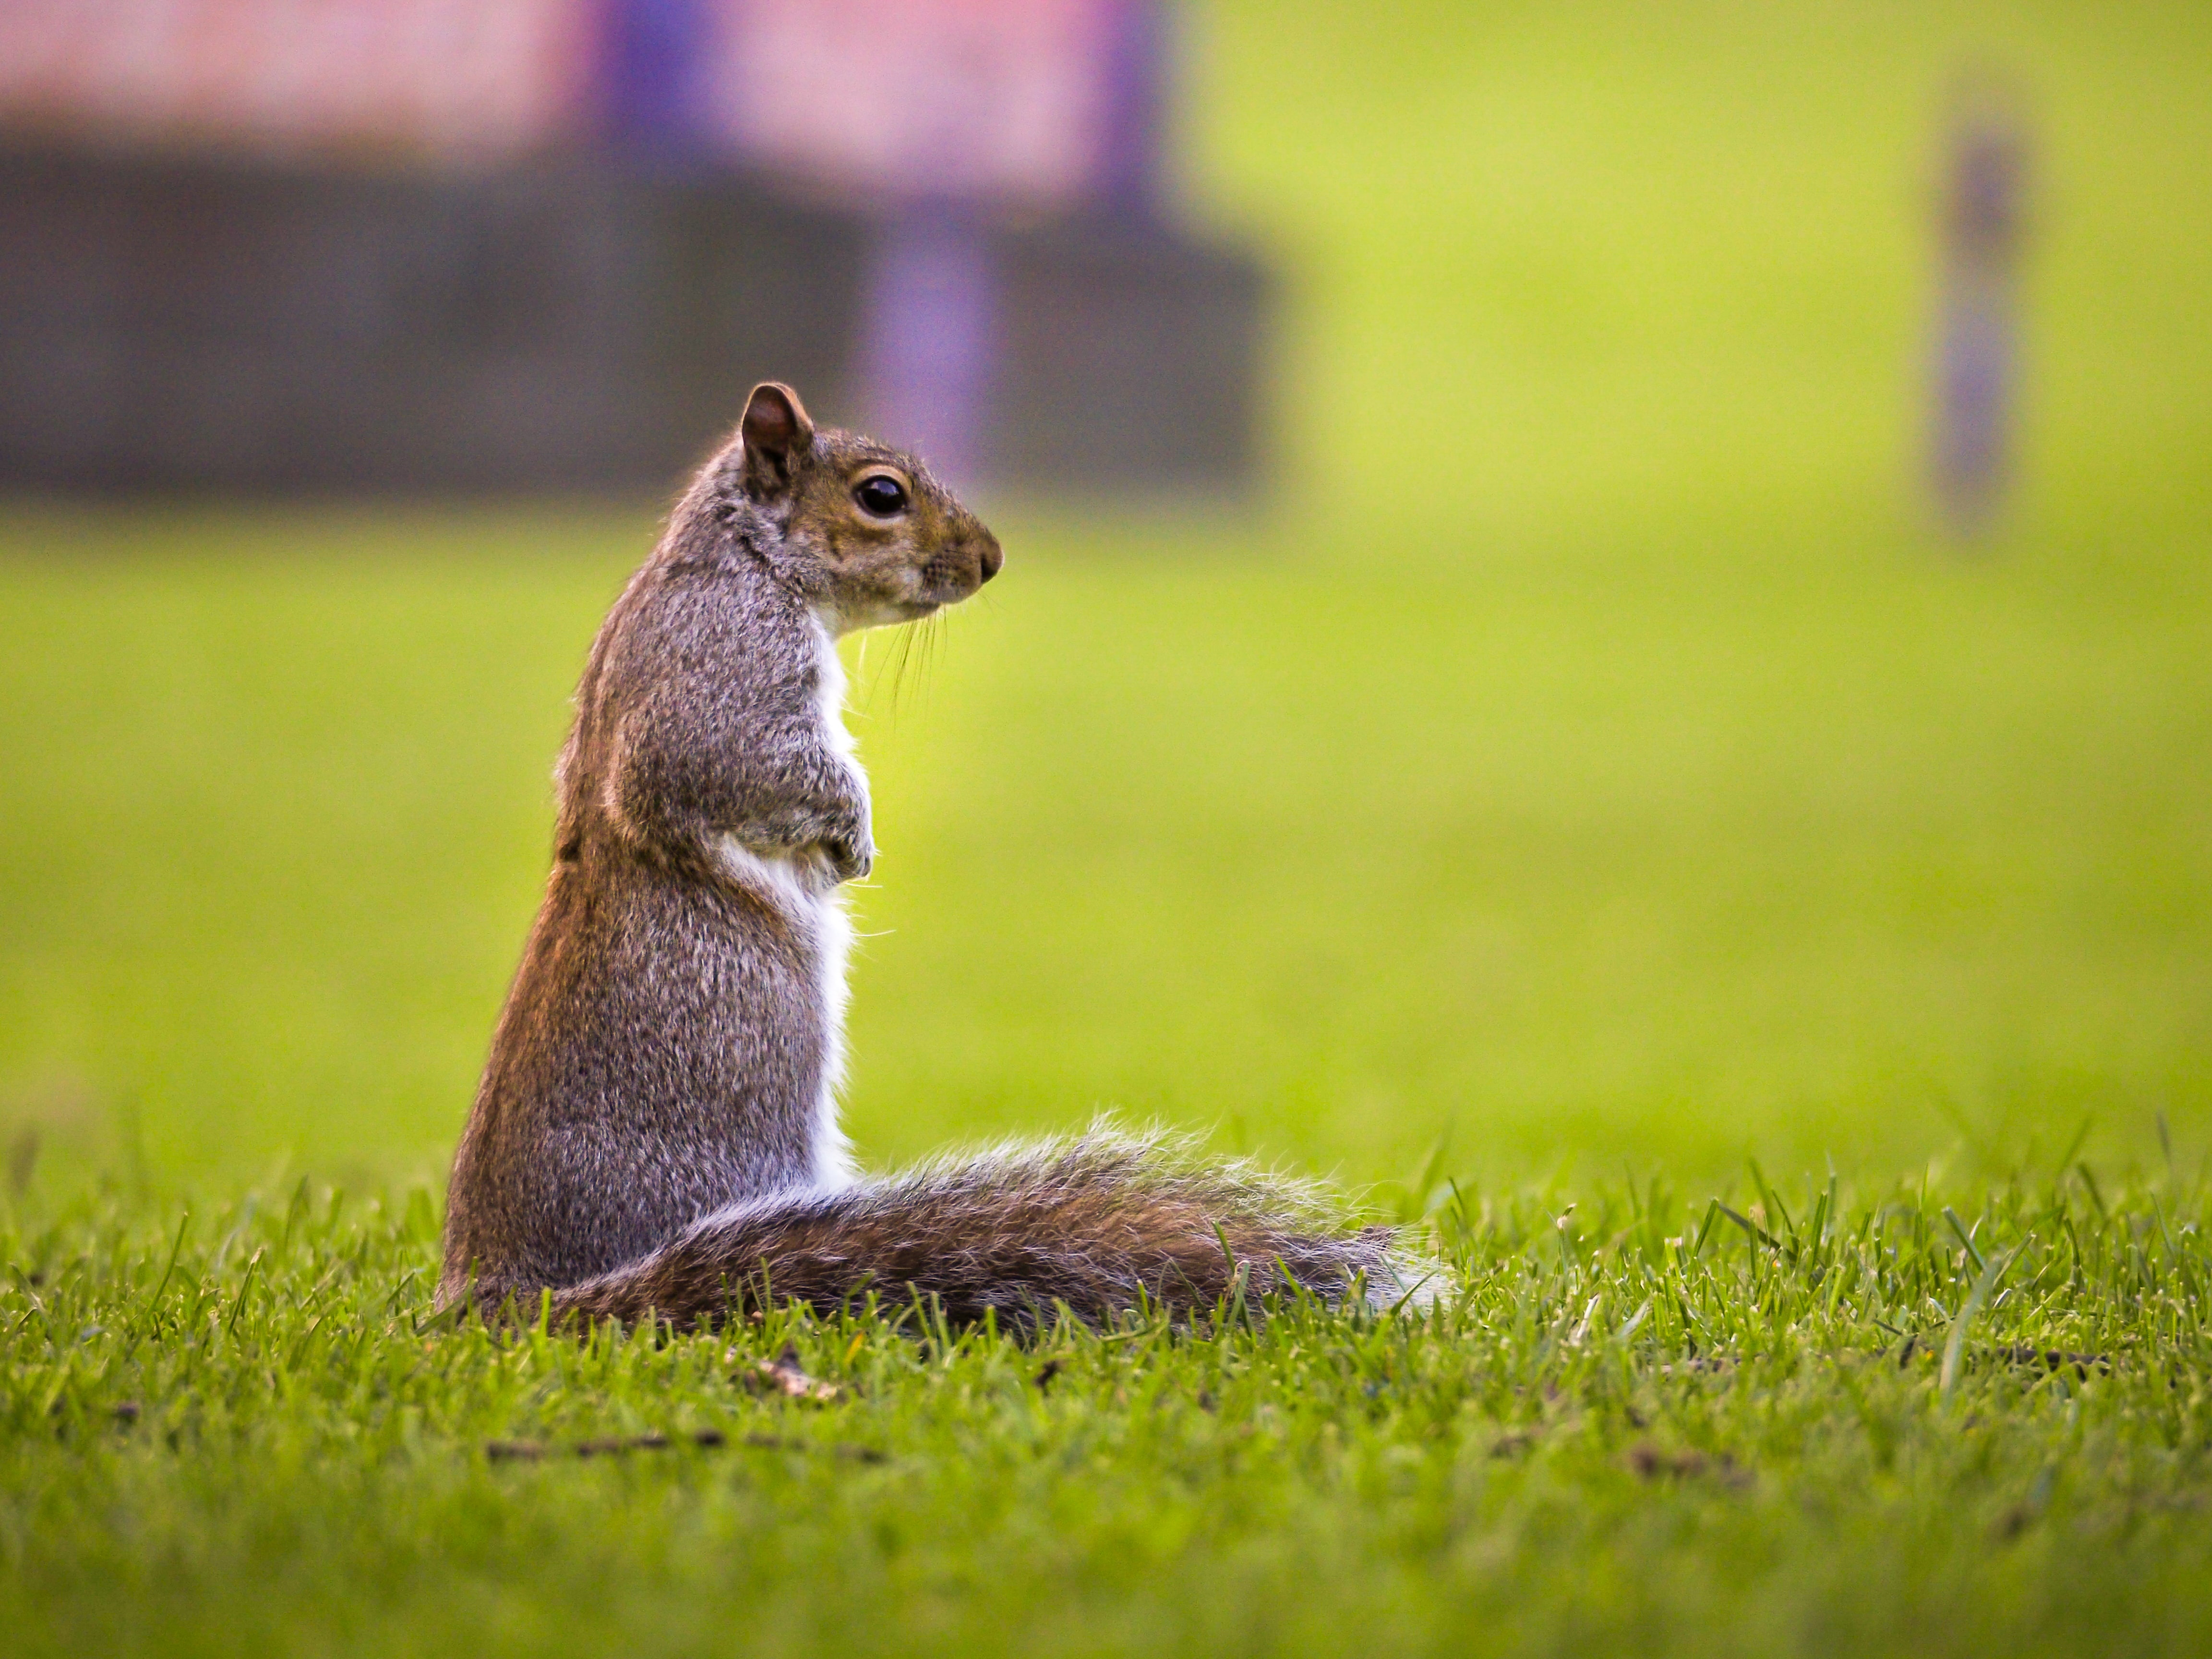 photo of a squirrel in a grass field